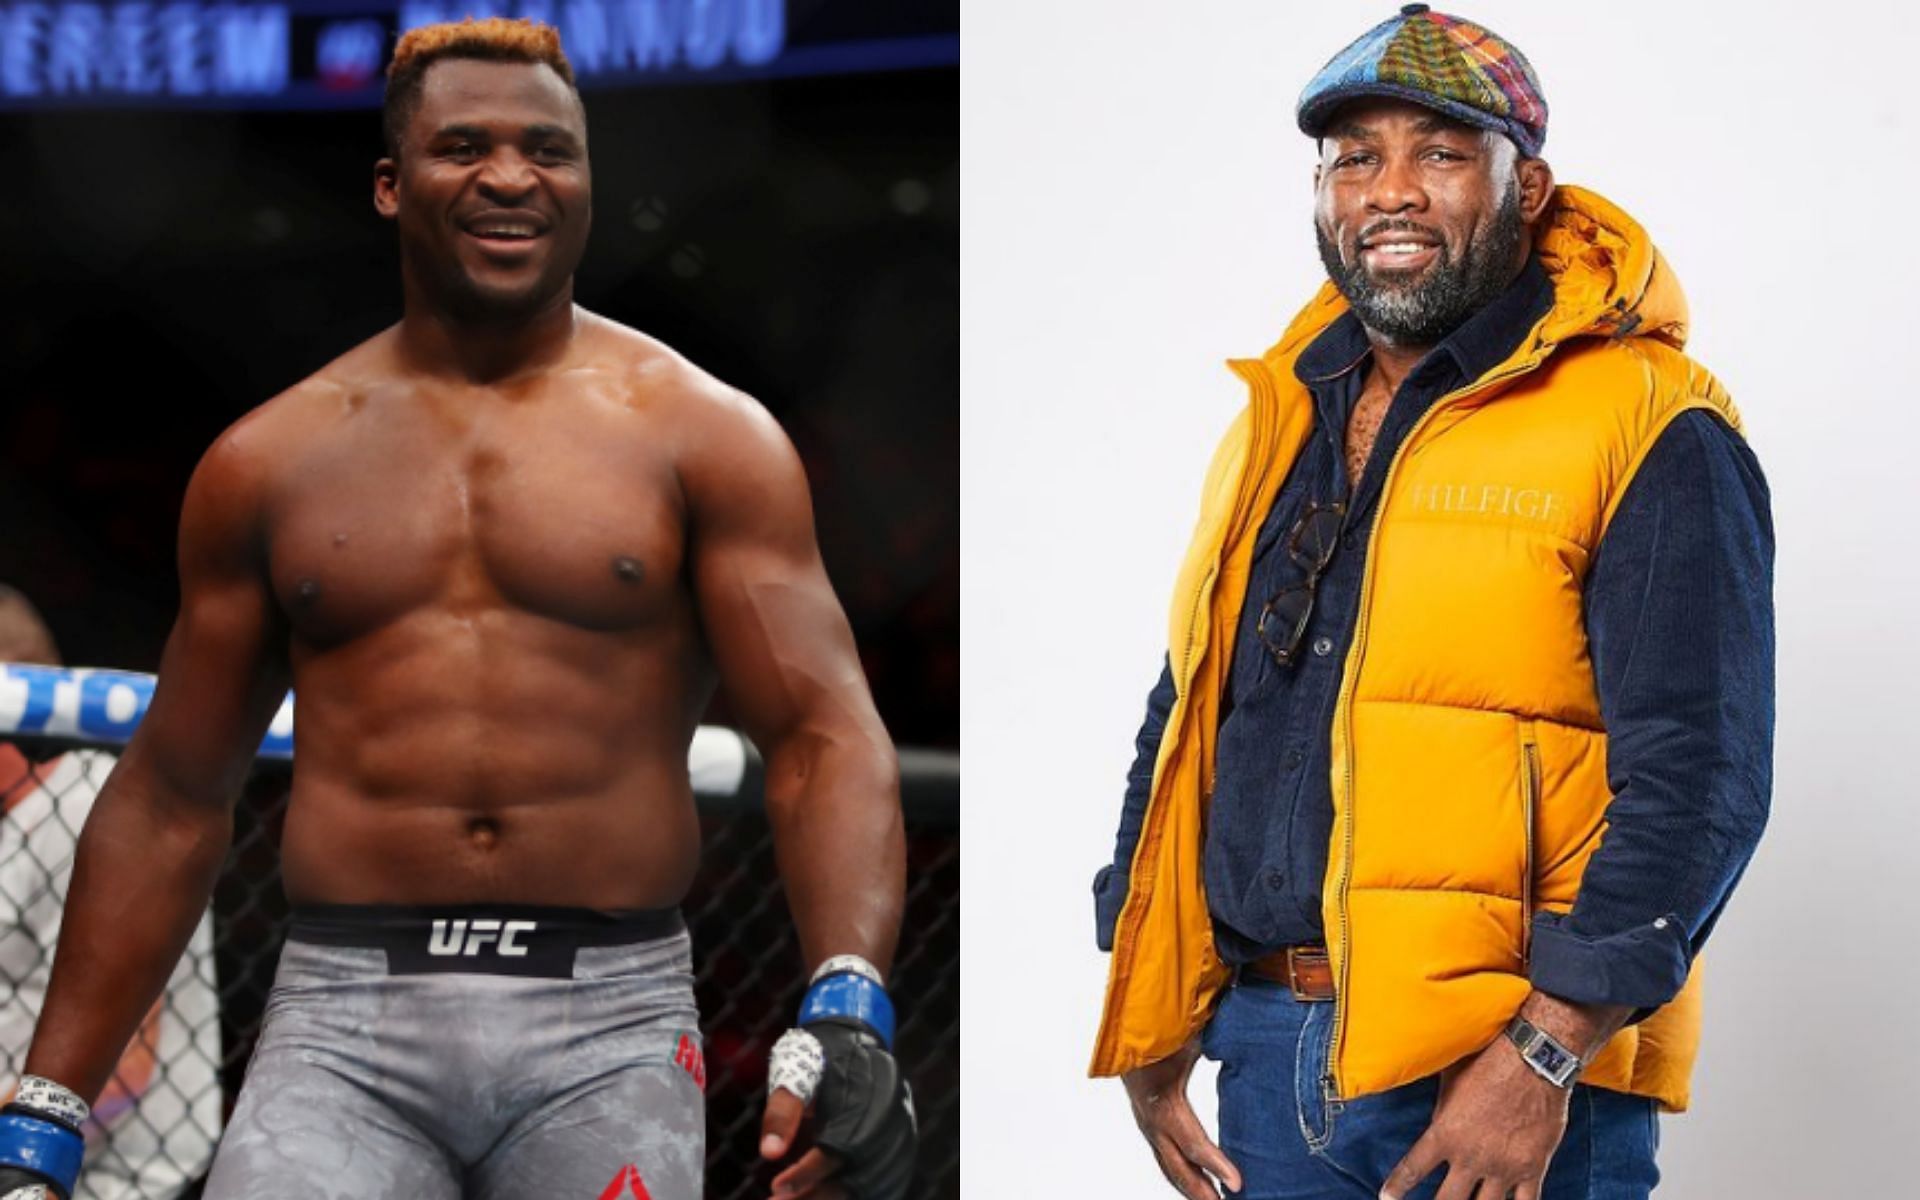 UFC heavyweight champion Francis Ngannou (left) and his former head coach Fernand Lopez (right; Image credit: @lopez_fernand on Instagram)